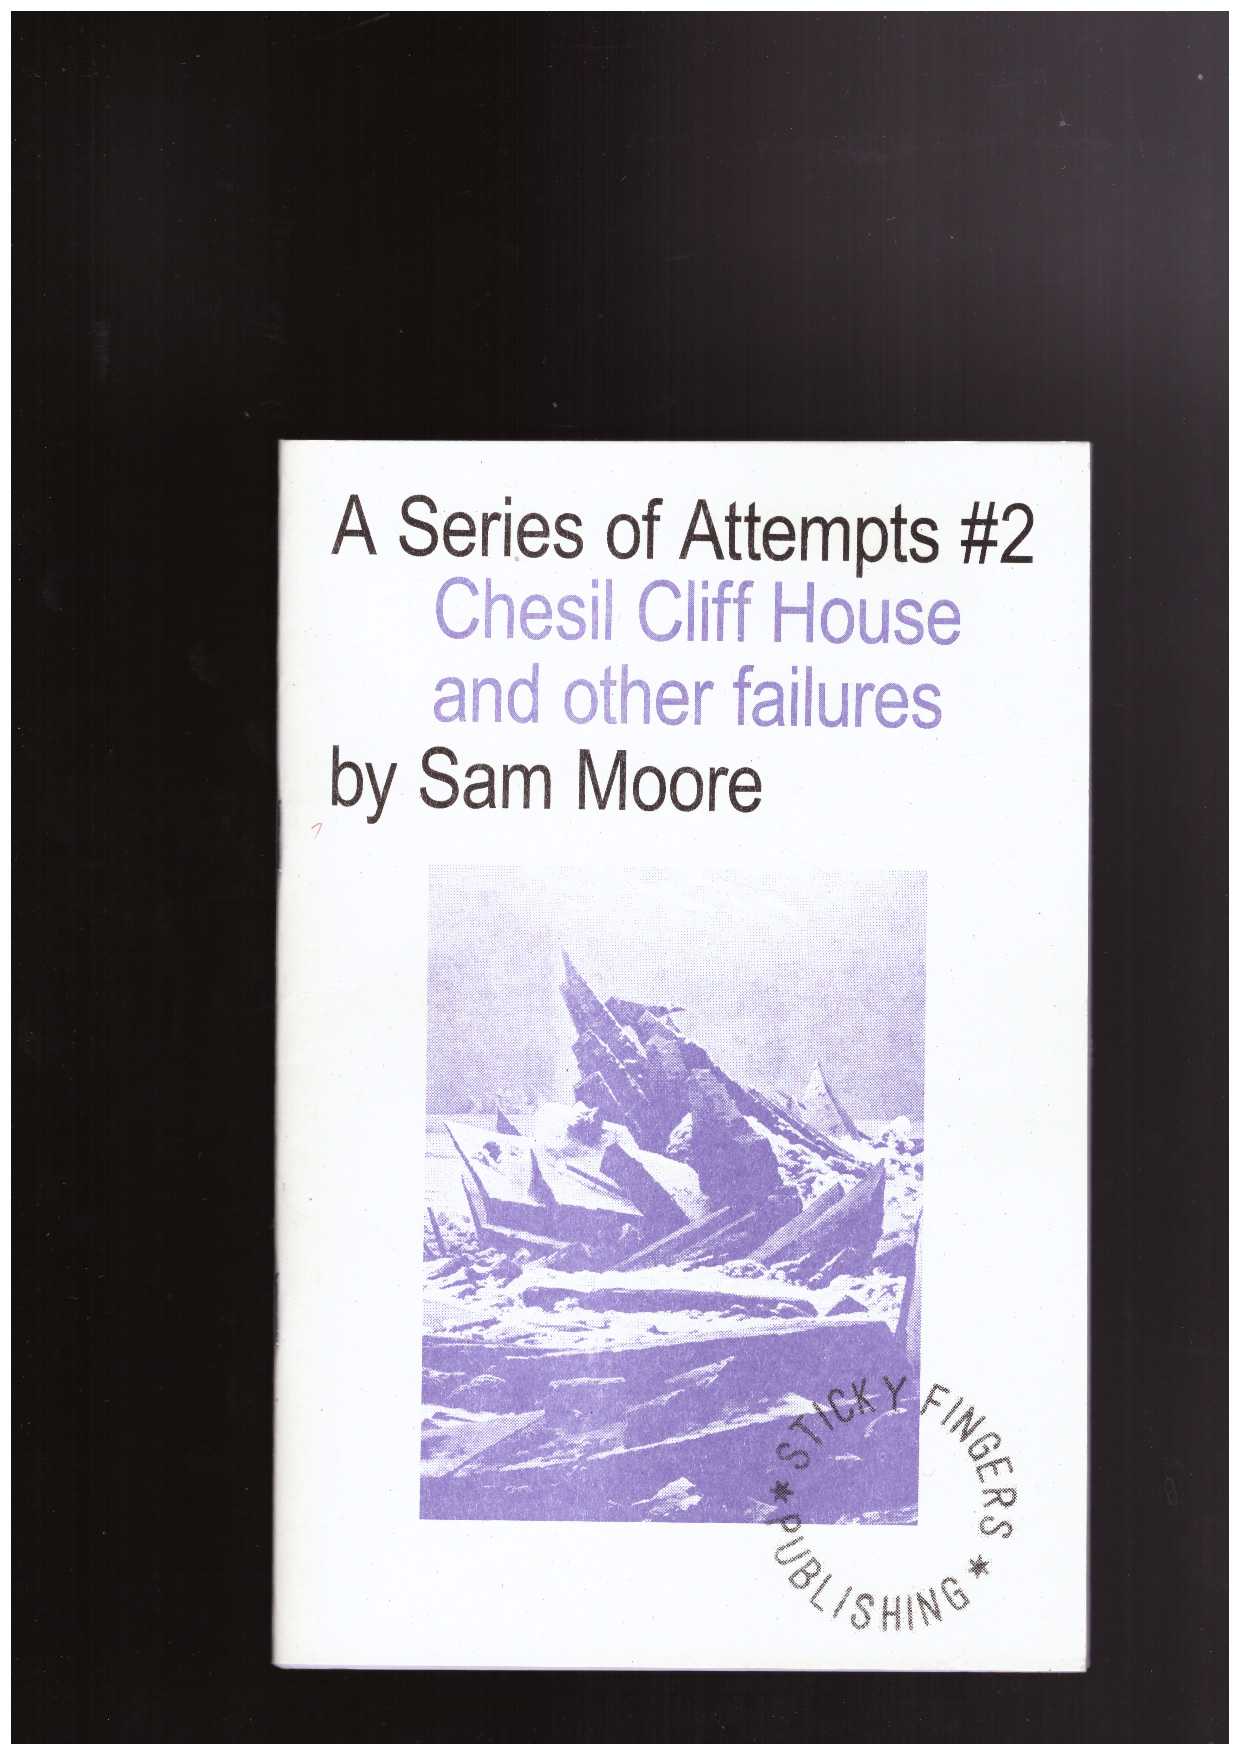 MOORE, Sam - A Series of Attempts #2 , Chesil Cliff House and other failures